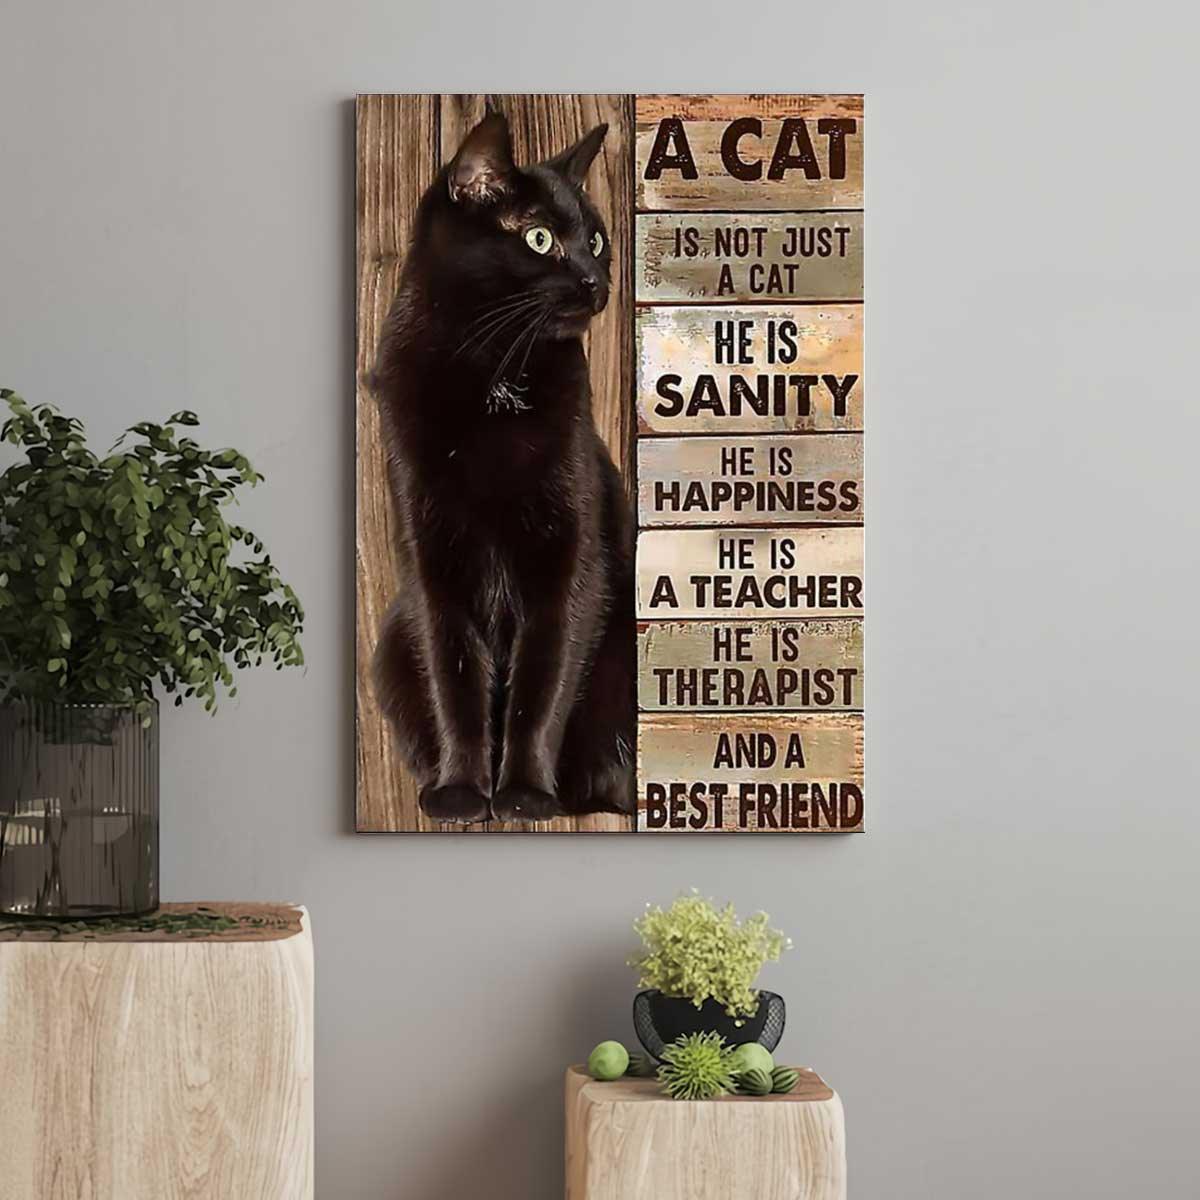 Black Cat Portrait Canvas - He is sanity happiness teacher therapist and best friend Premium Wrapped Canvas - Gift For Family, Cat Lovers - Amzanimalsgift